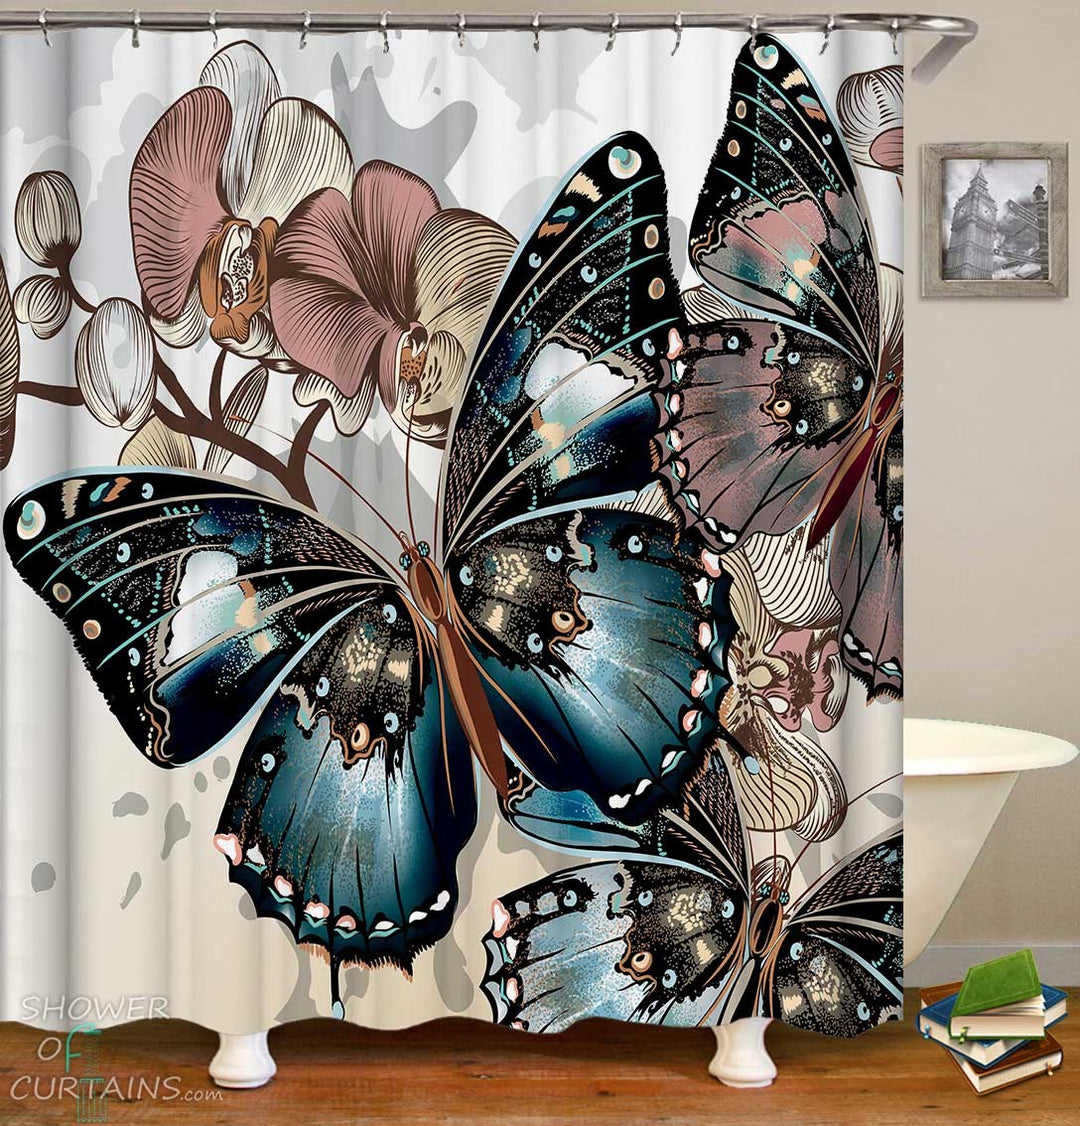 Shower Curtains with Giant Butterflies 